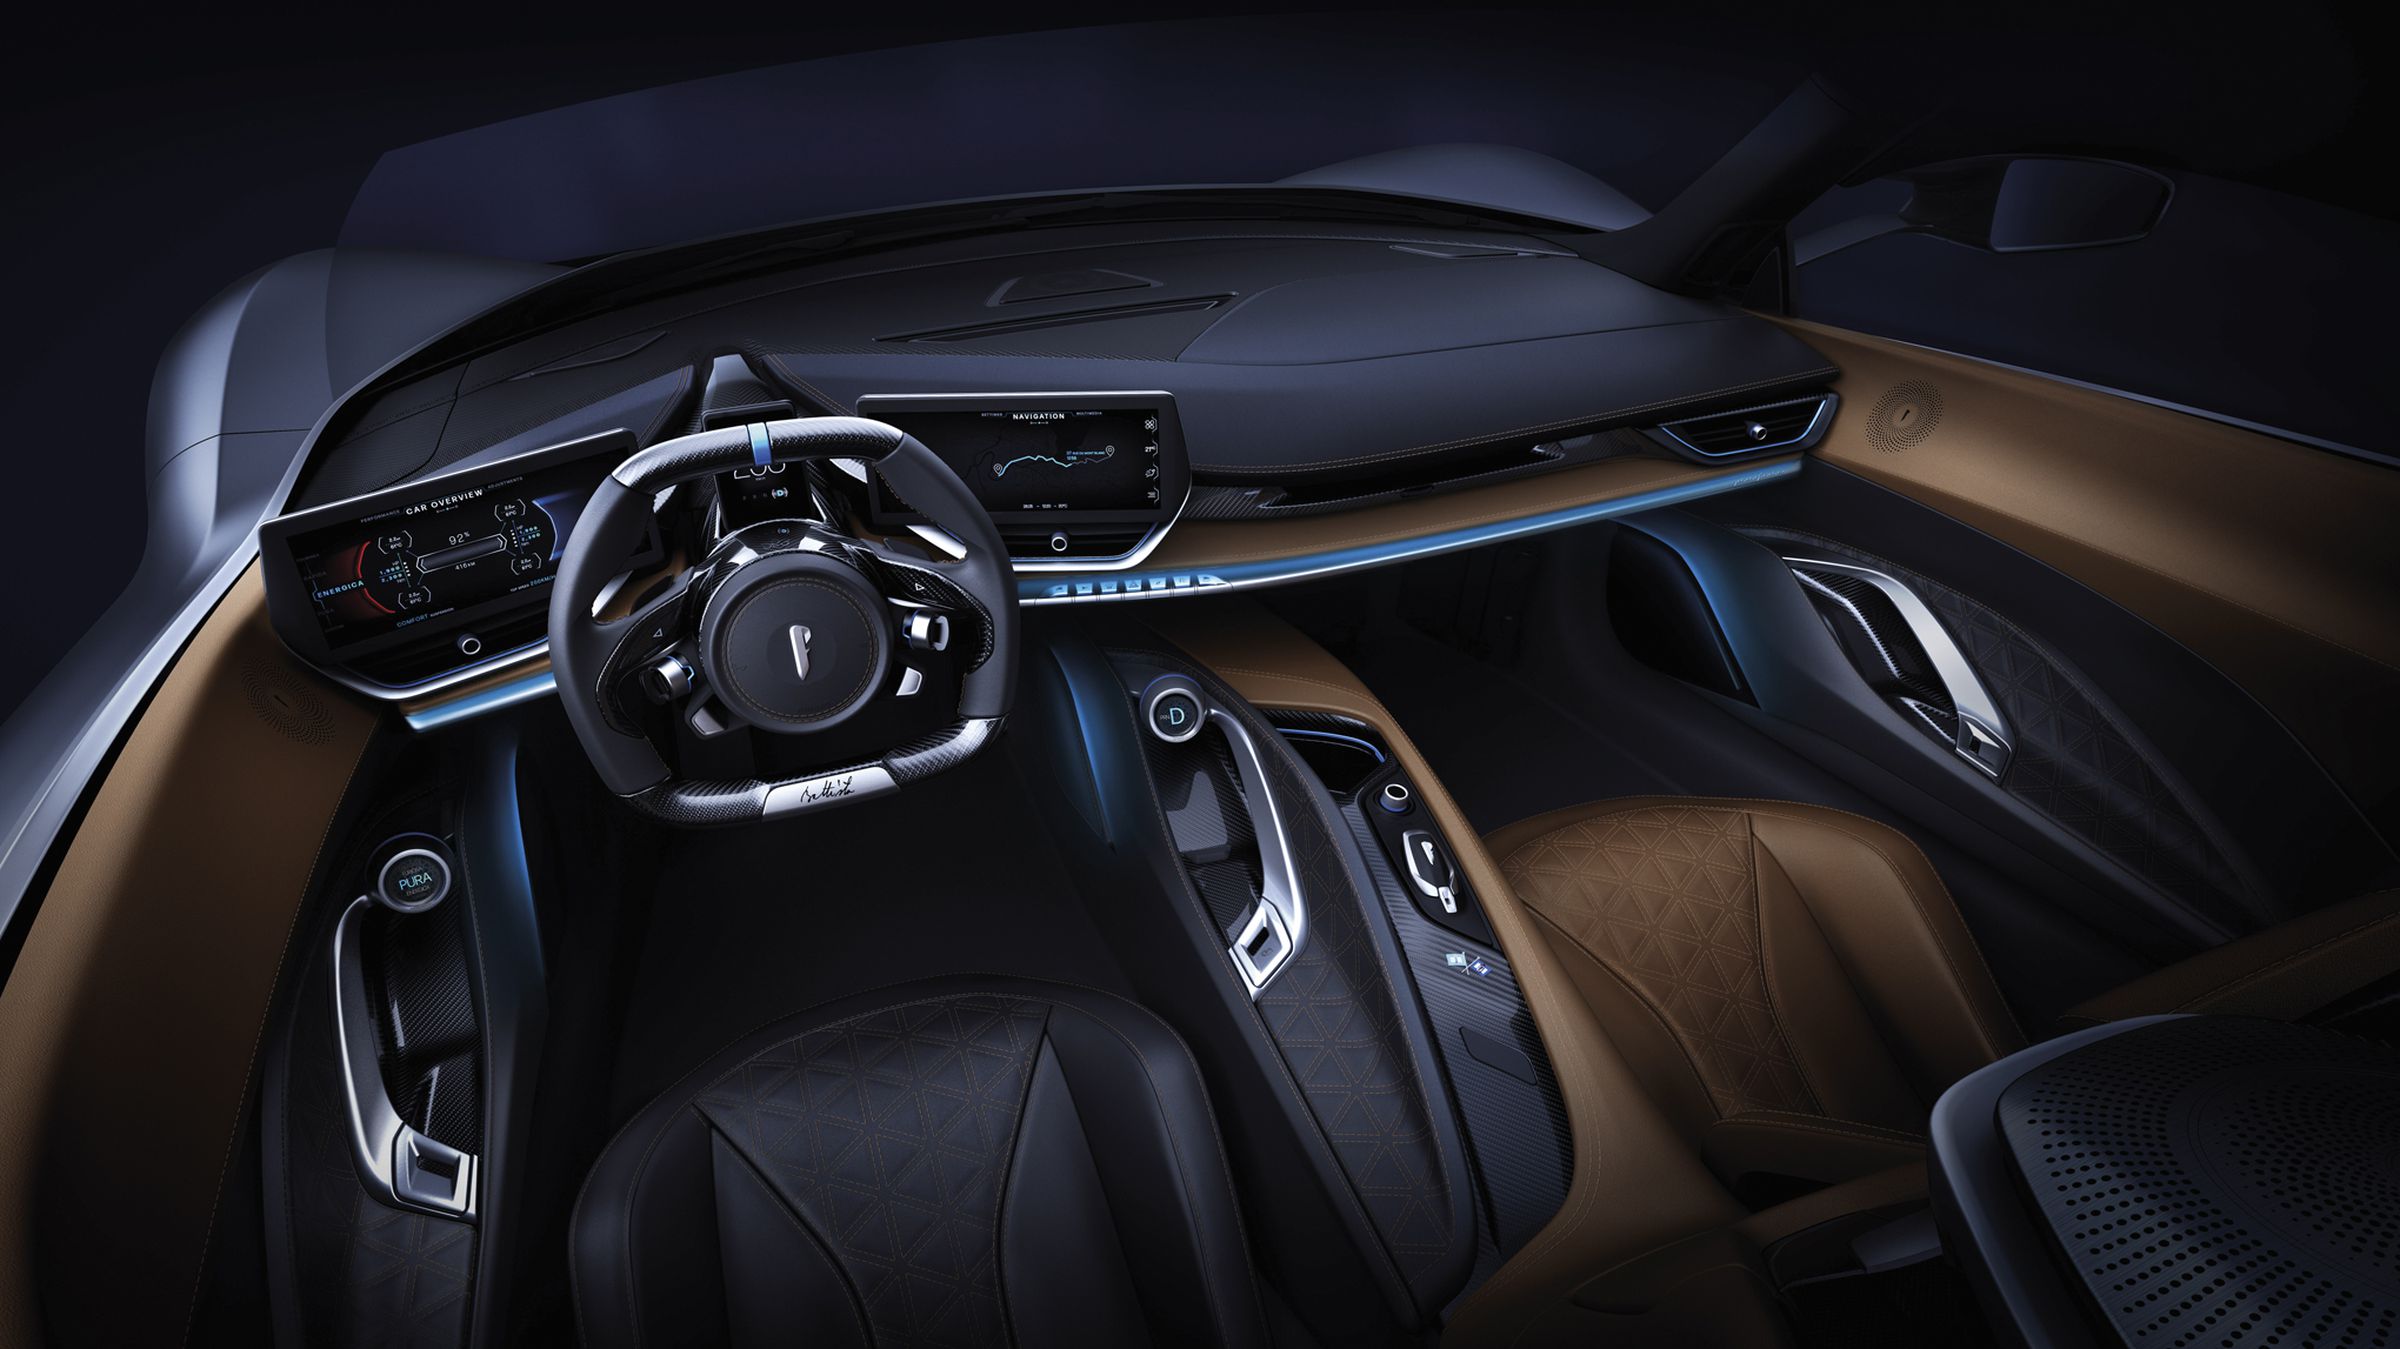 The Battista’s interior is more luxe than some other hypercars.